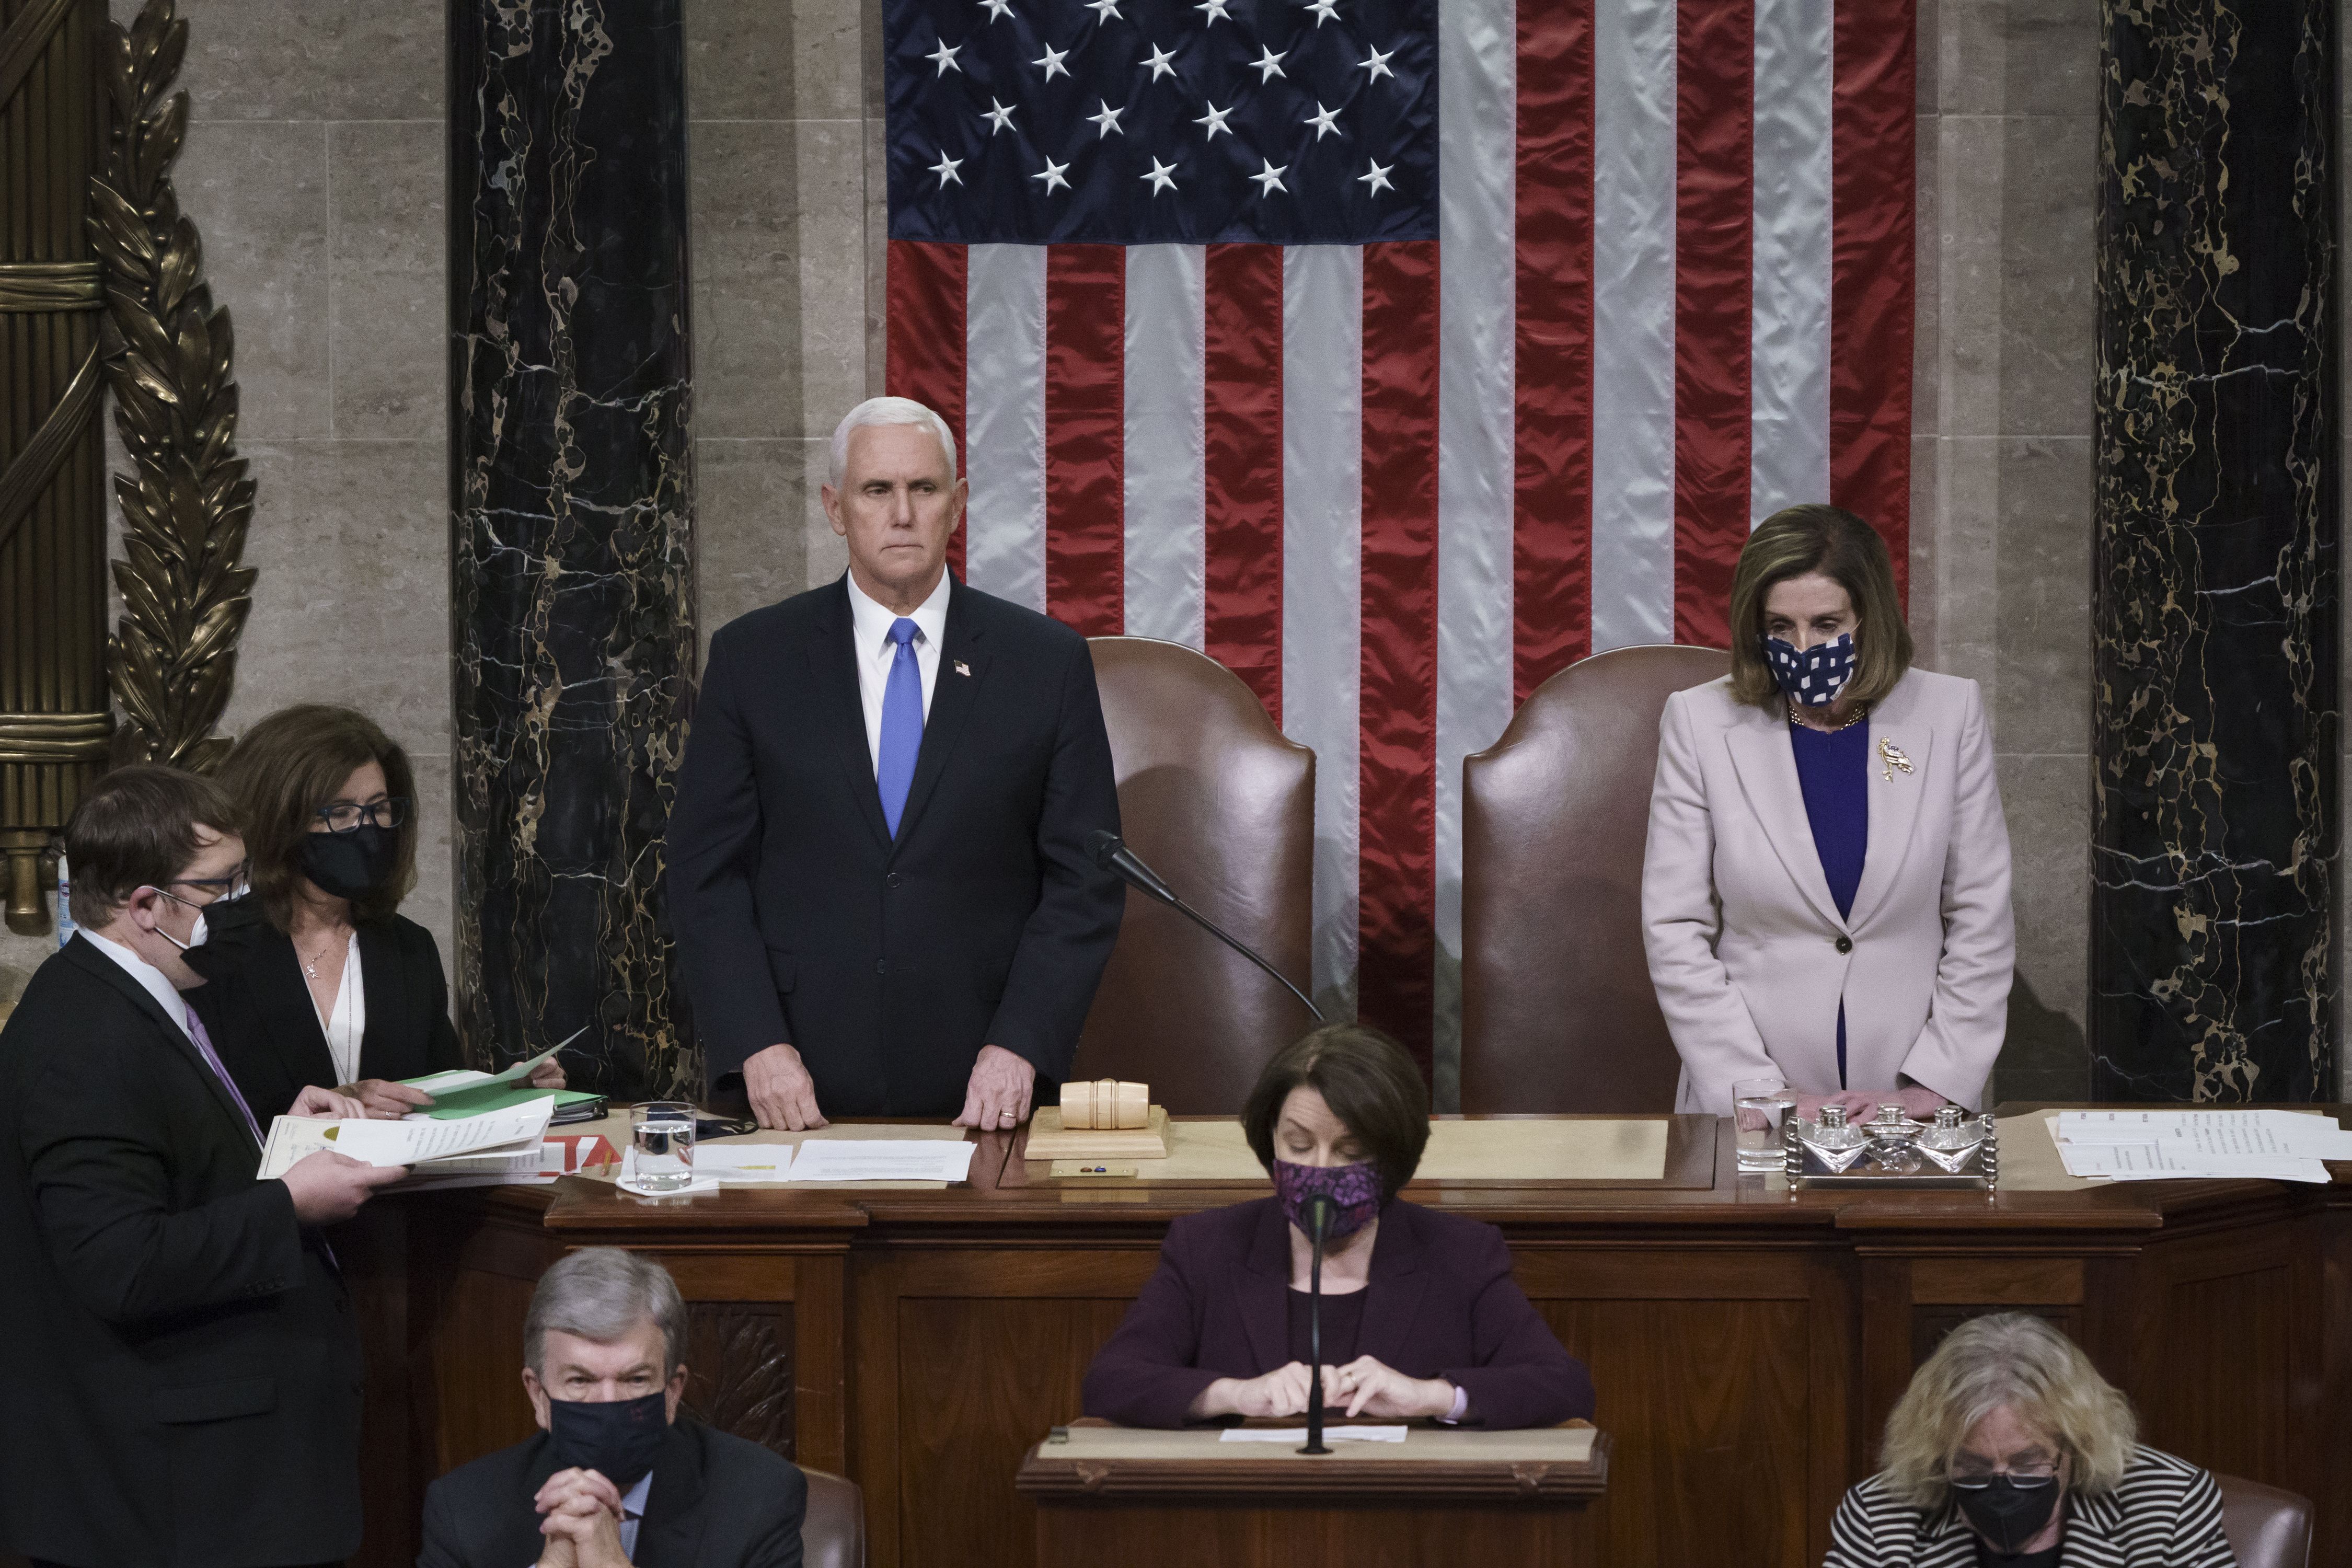  Vice President Mike Pence and Speaker of the House Nancy Pelosi, D-Calif., read the final certification of Electoral College votes cast.